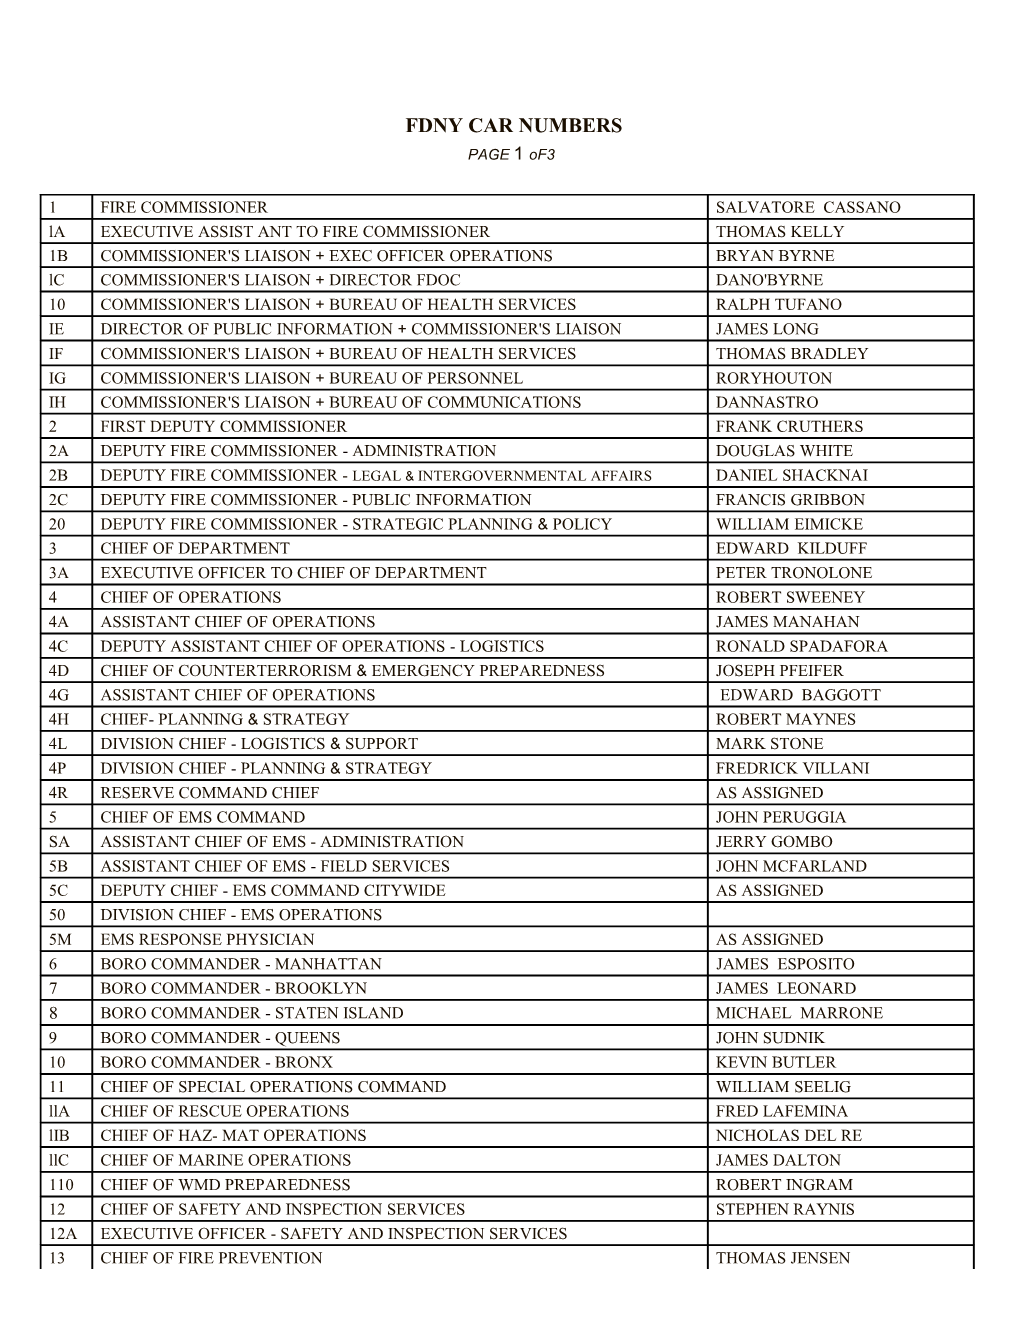 FDNY CAR NUMBERS PAGE 1 Of3